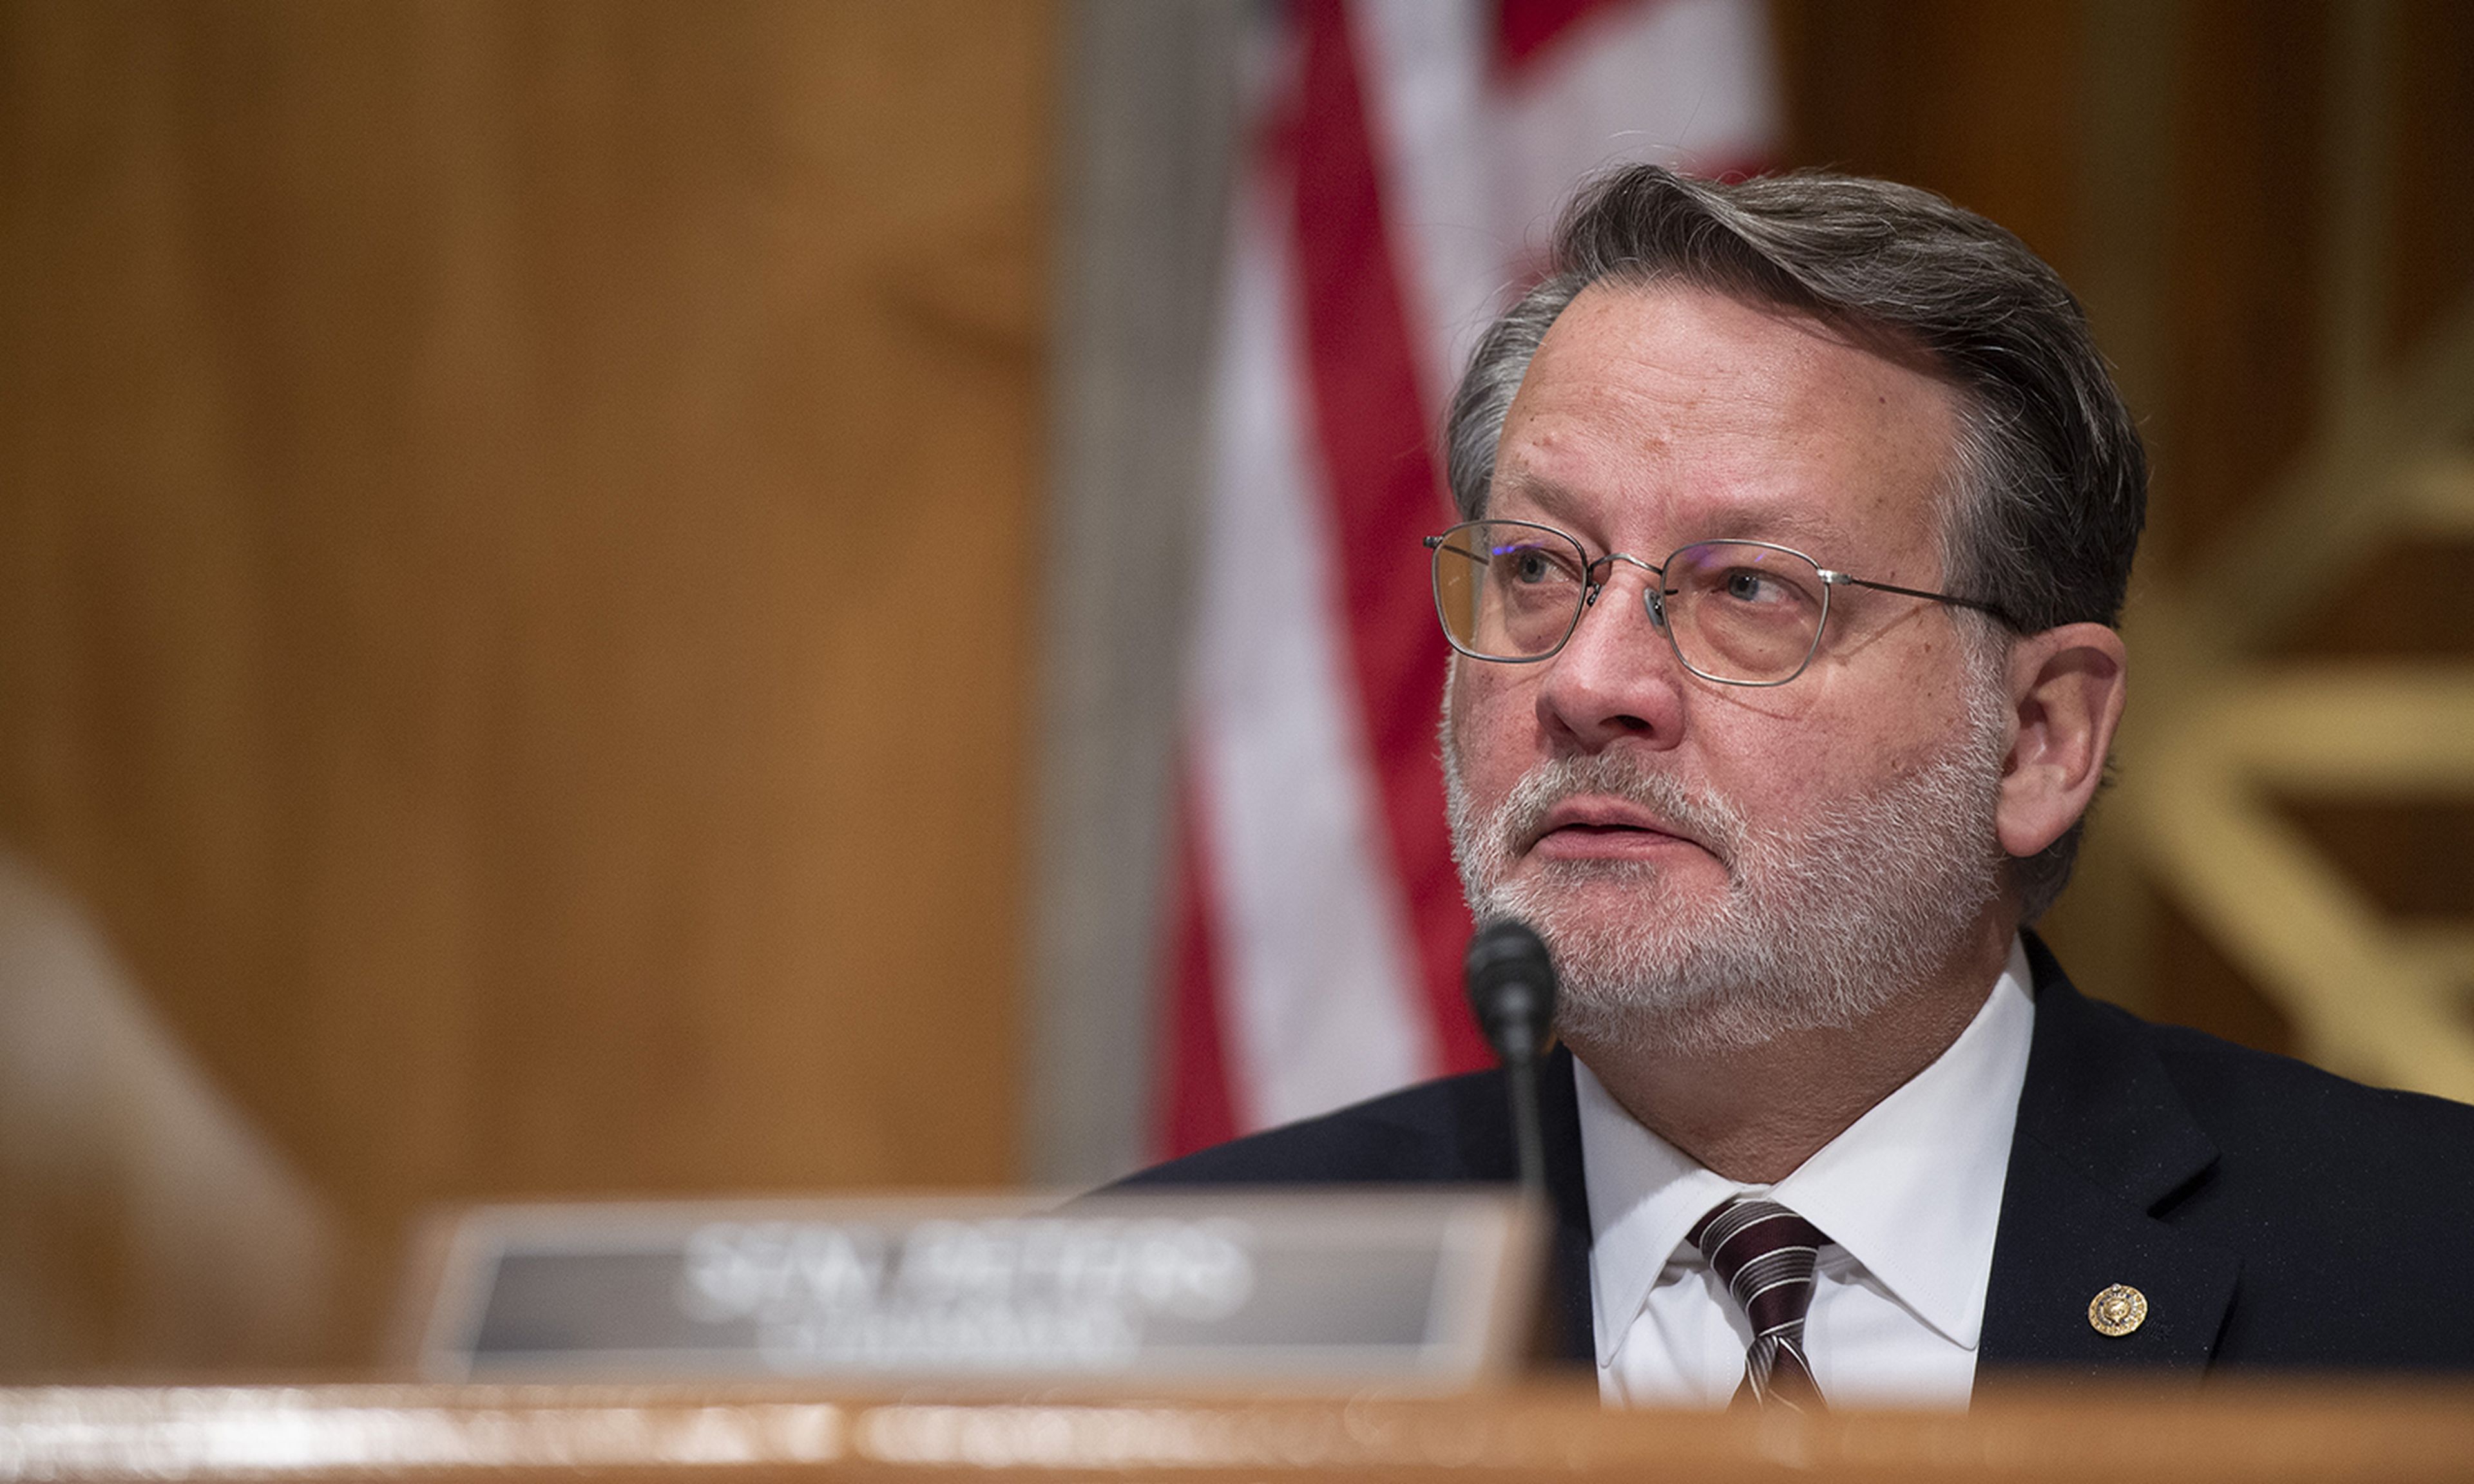 Chairman Sen. Gary Peters, D-Mich., speaks during a Senate Homeland Security and Governmental Affairs Committee hearing on Feb. 1, 2022, in Washington. (Photo by Bonnie Cash/Pool via Getty Images)